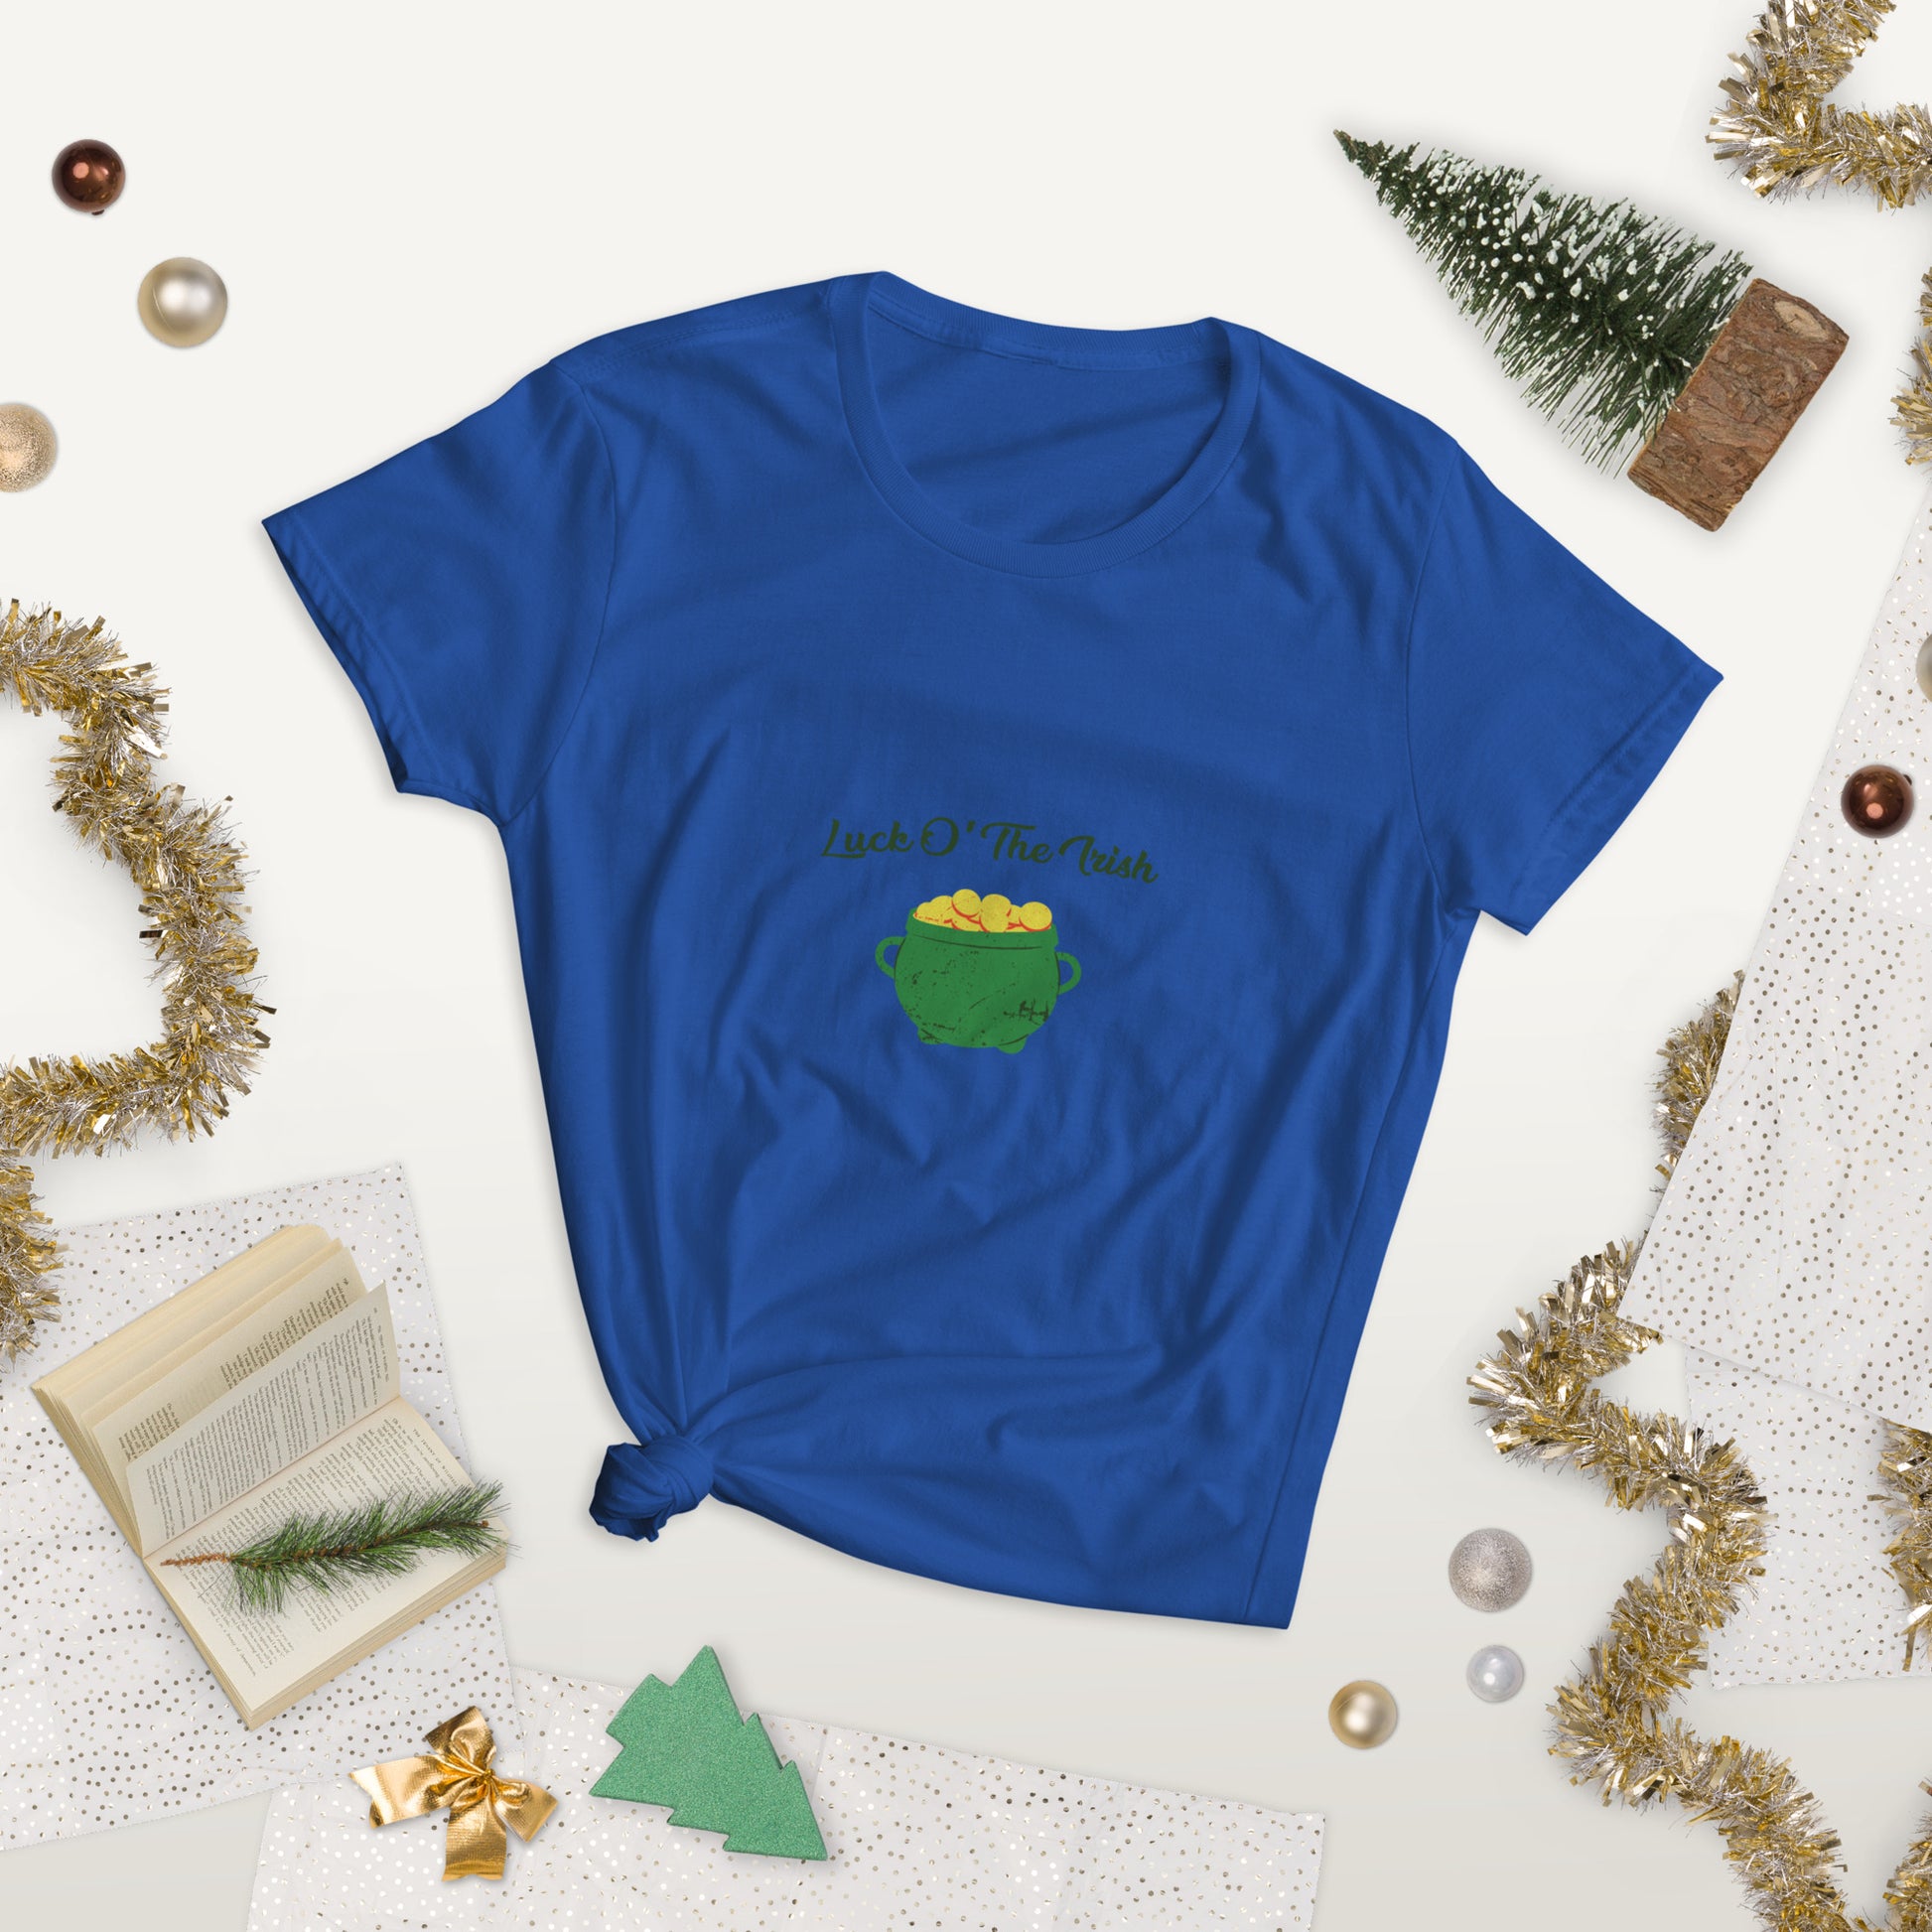 Women's "Luck O’ The Irish" T-shirt - Weave Got Gifts - Unique Gifts You Won’t Find Anywhere Else!